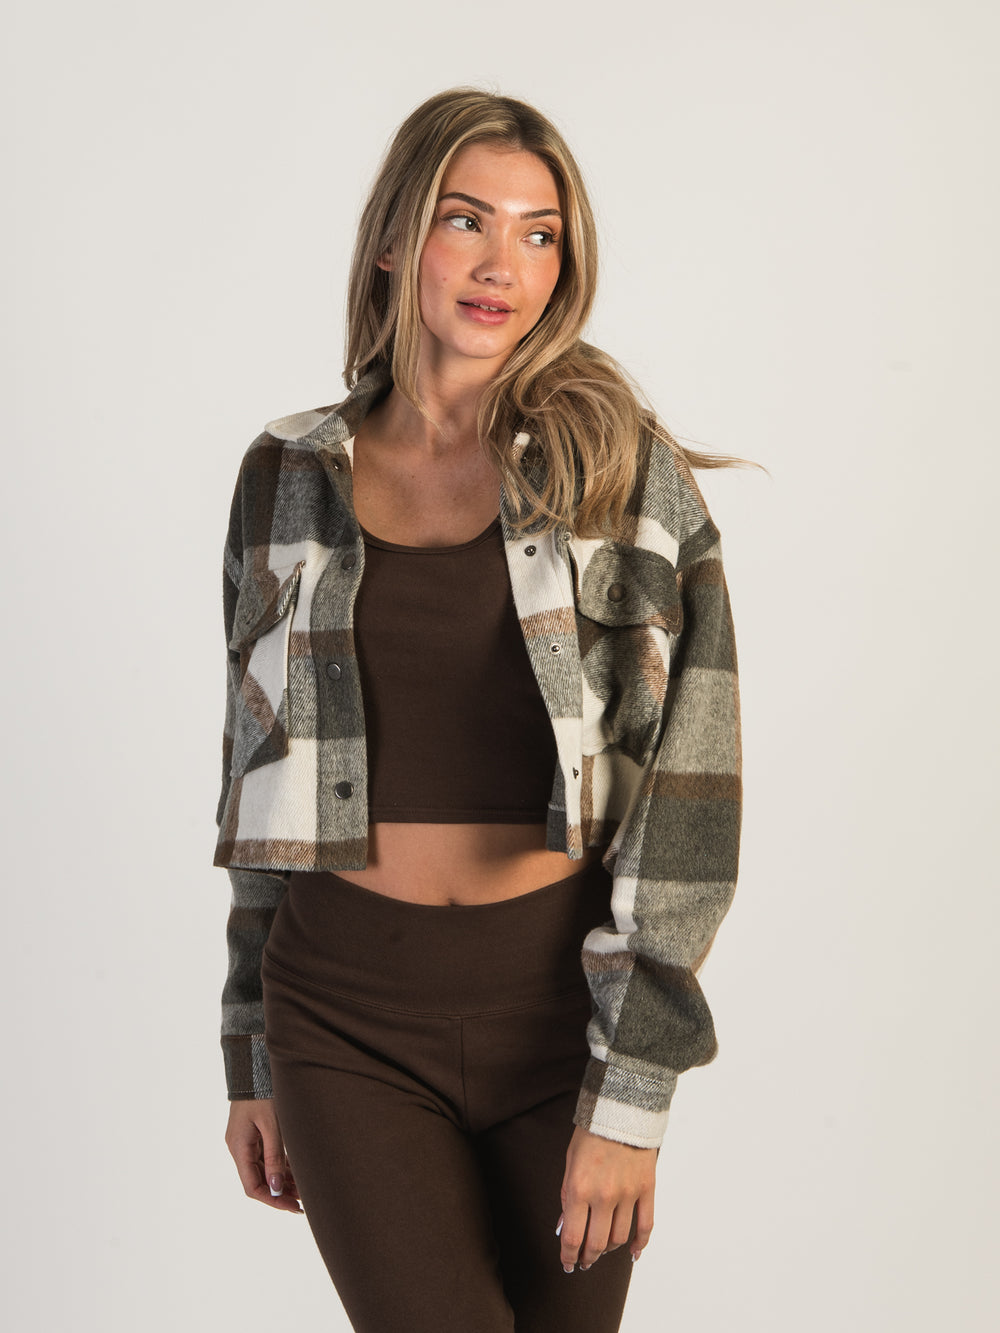 HARLOW BRITTANY CROPPED JACKET